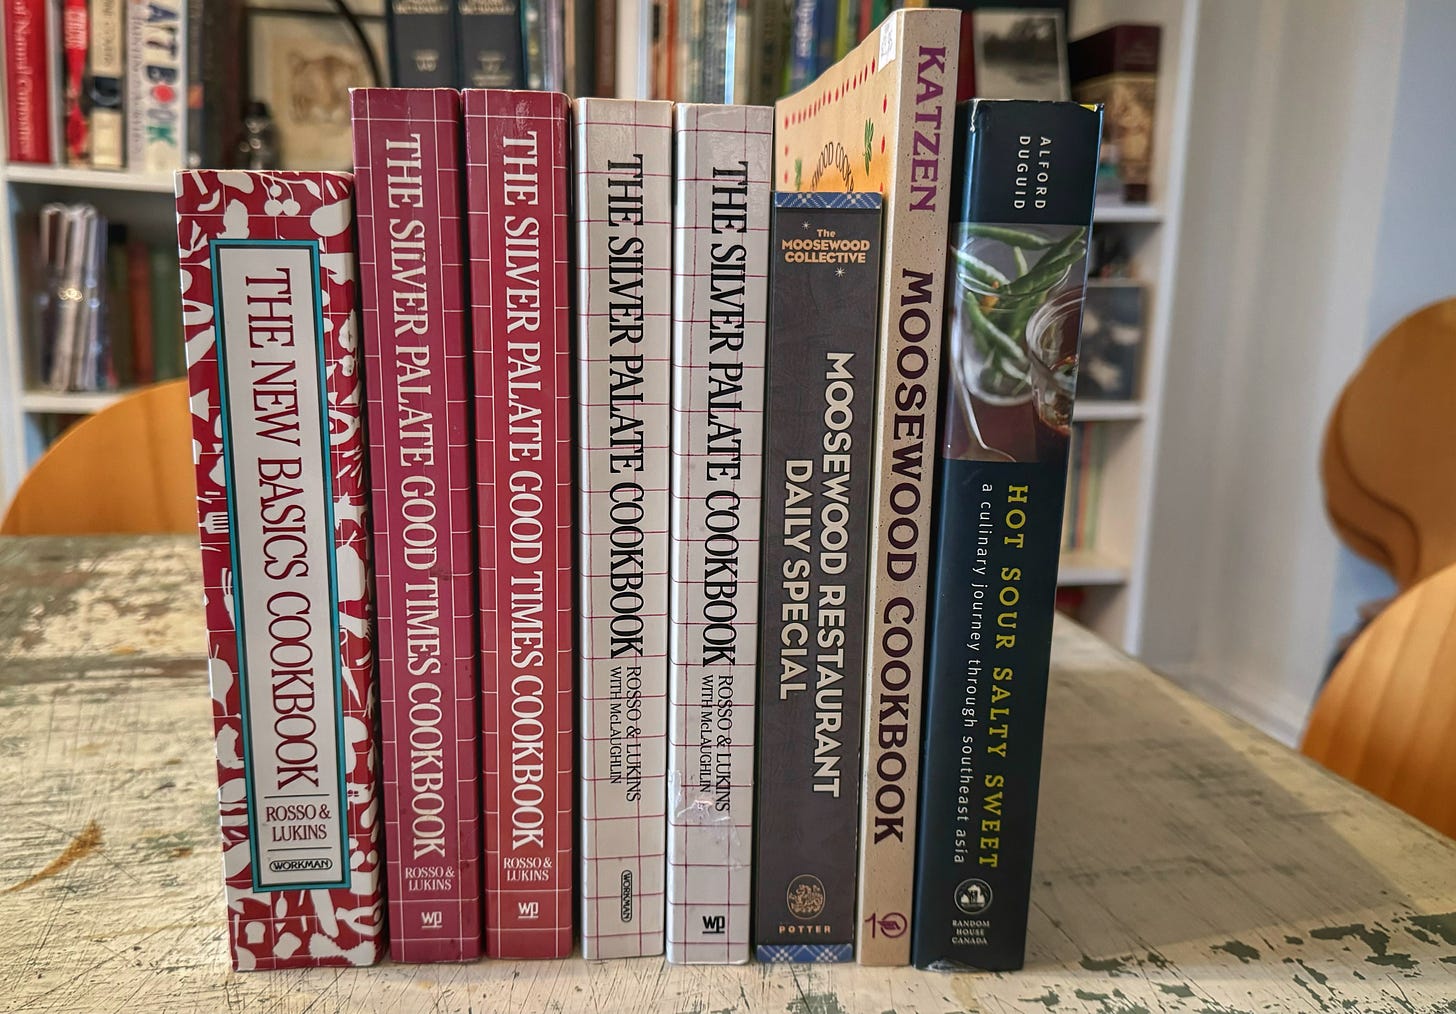 A lineup of cookbooks on a table. From left to right they are: "The New Basics Cookbook," two copies of "The Silver Palate Good Times Cookbook," two copies of "The Silver Palate Cookbook," "Moosewood Restaurant Daily Specials," "The Moosewood Cookbook," and "Hot Sour Salty Sweet: a culinary journey through Southeast Asia"